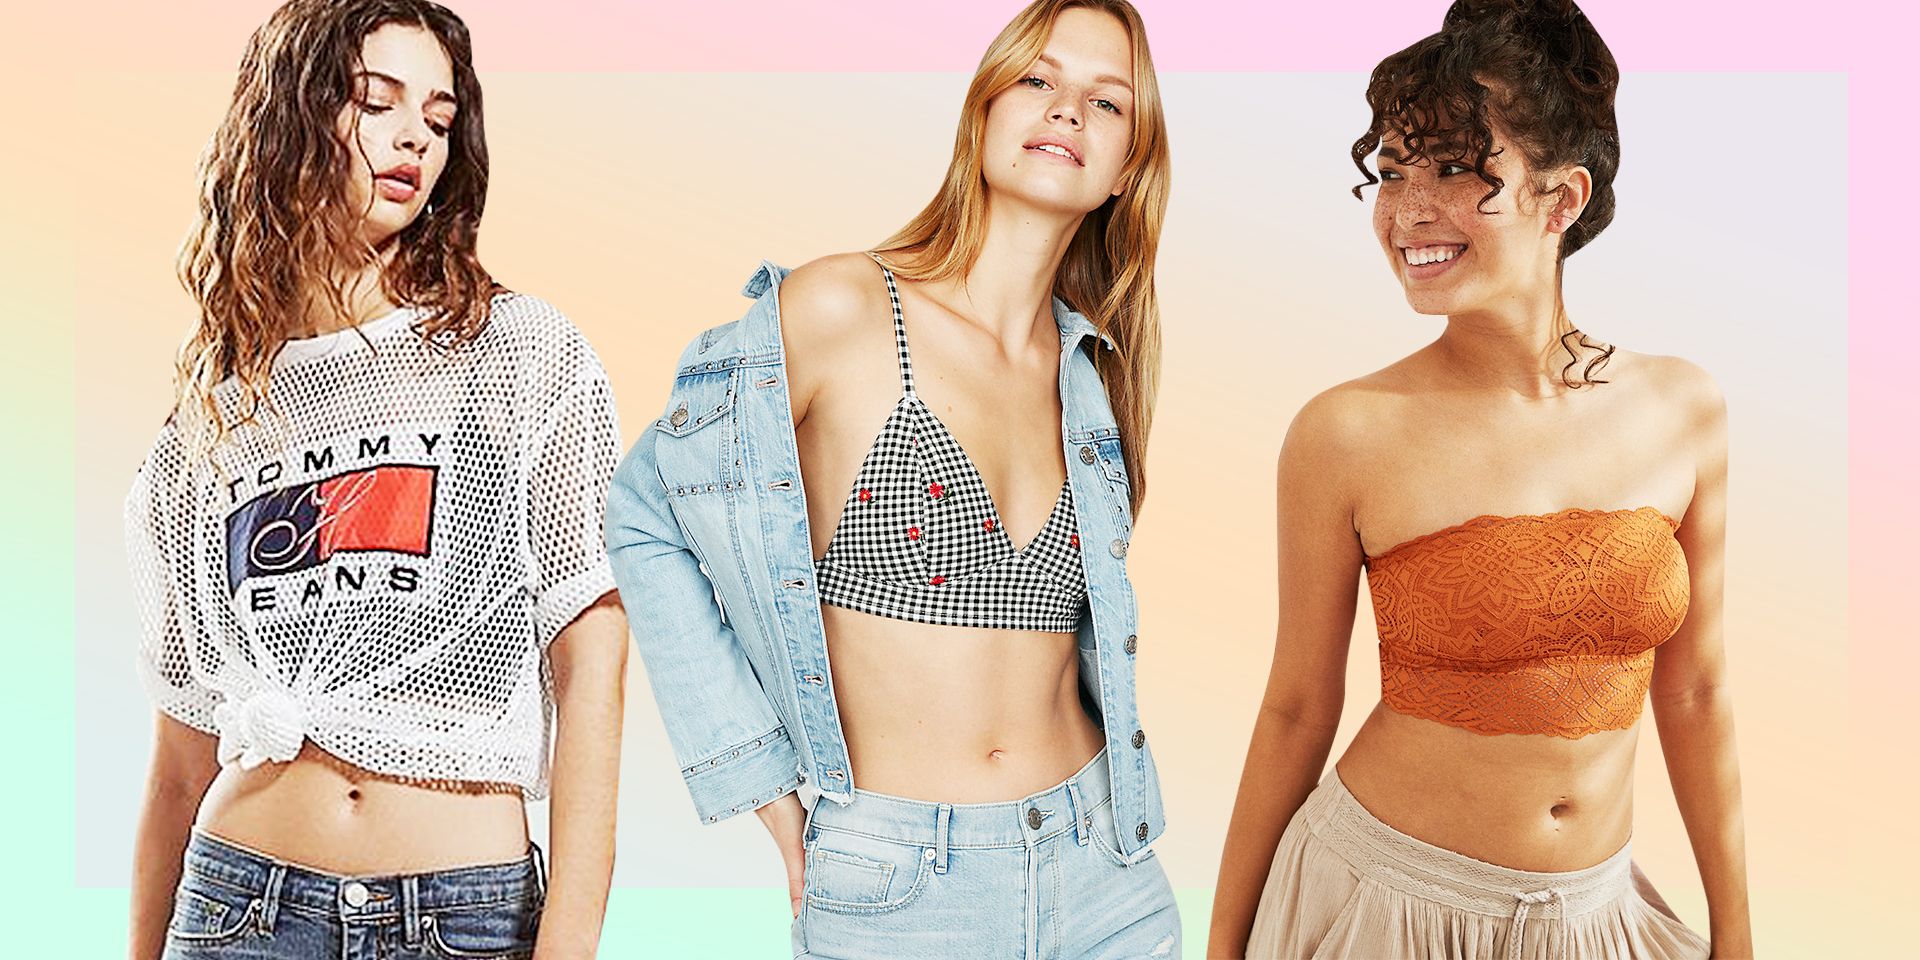 How To Wear A Bralette This Summer: 17 Ideas - Styleoholic